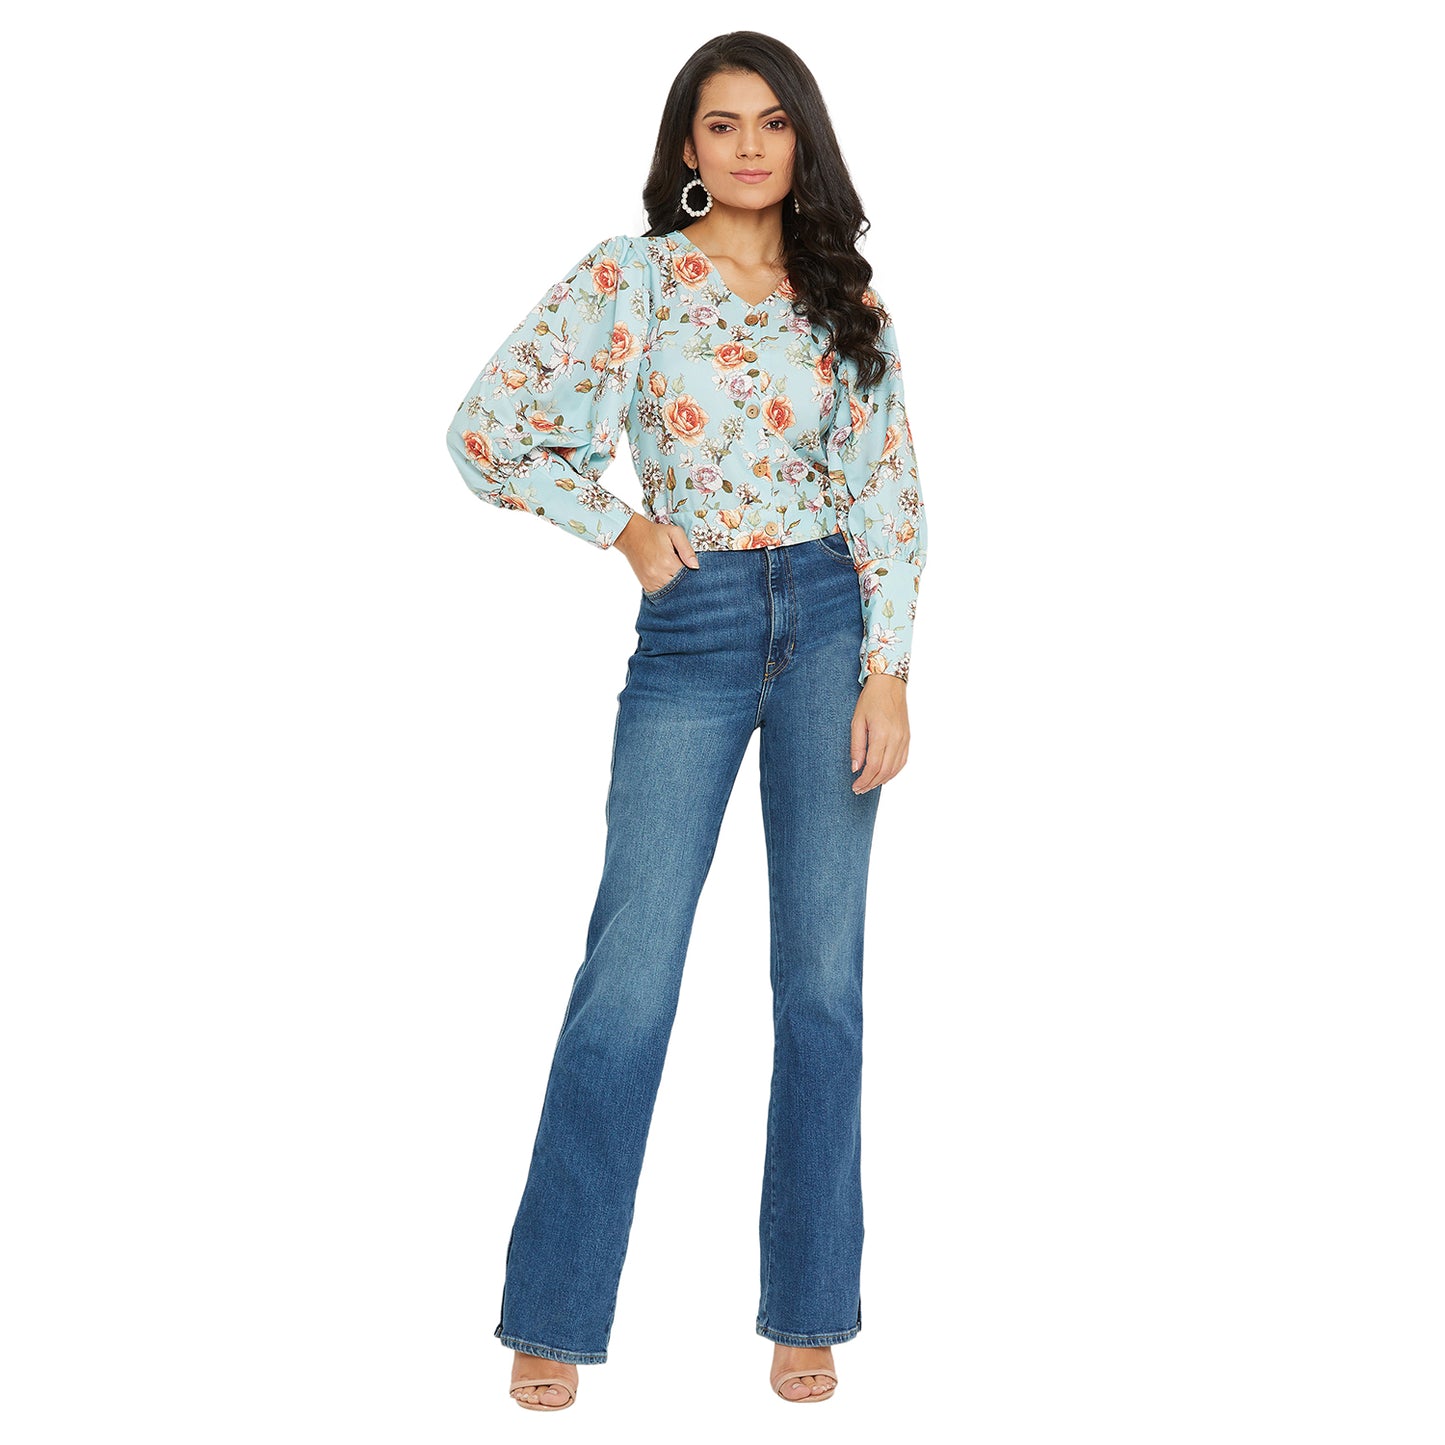 Ice Blue Floral Printed Top With Puff Sleeve